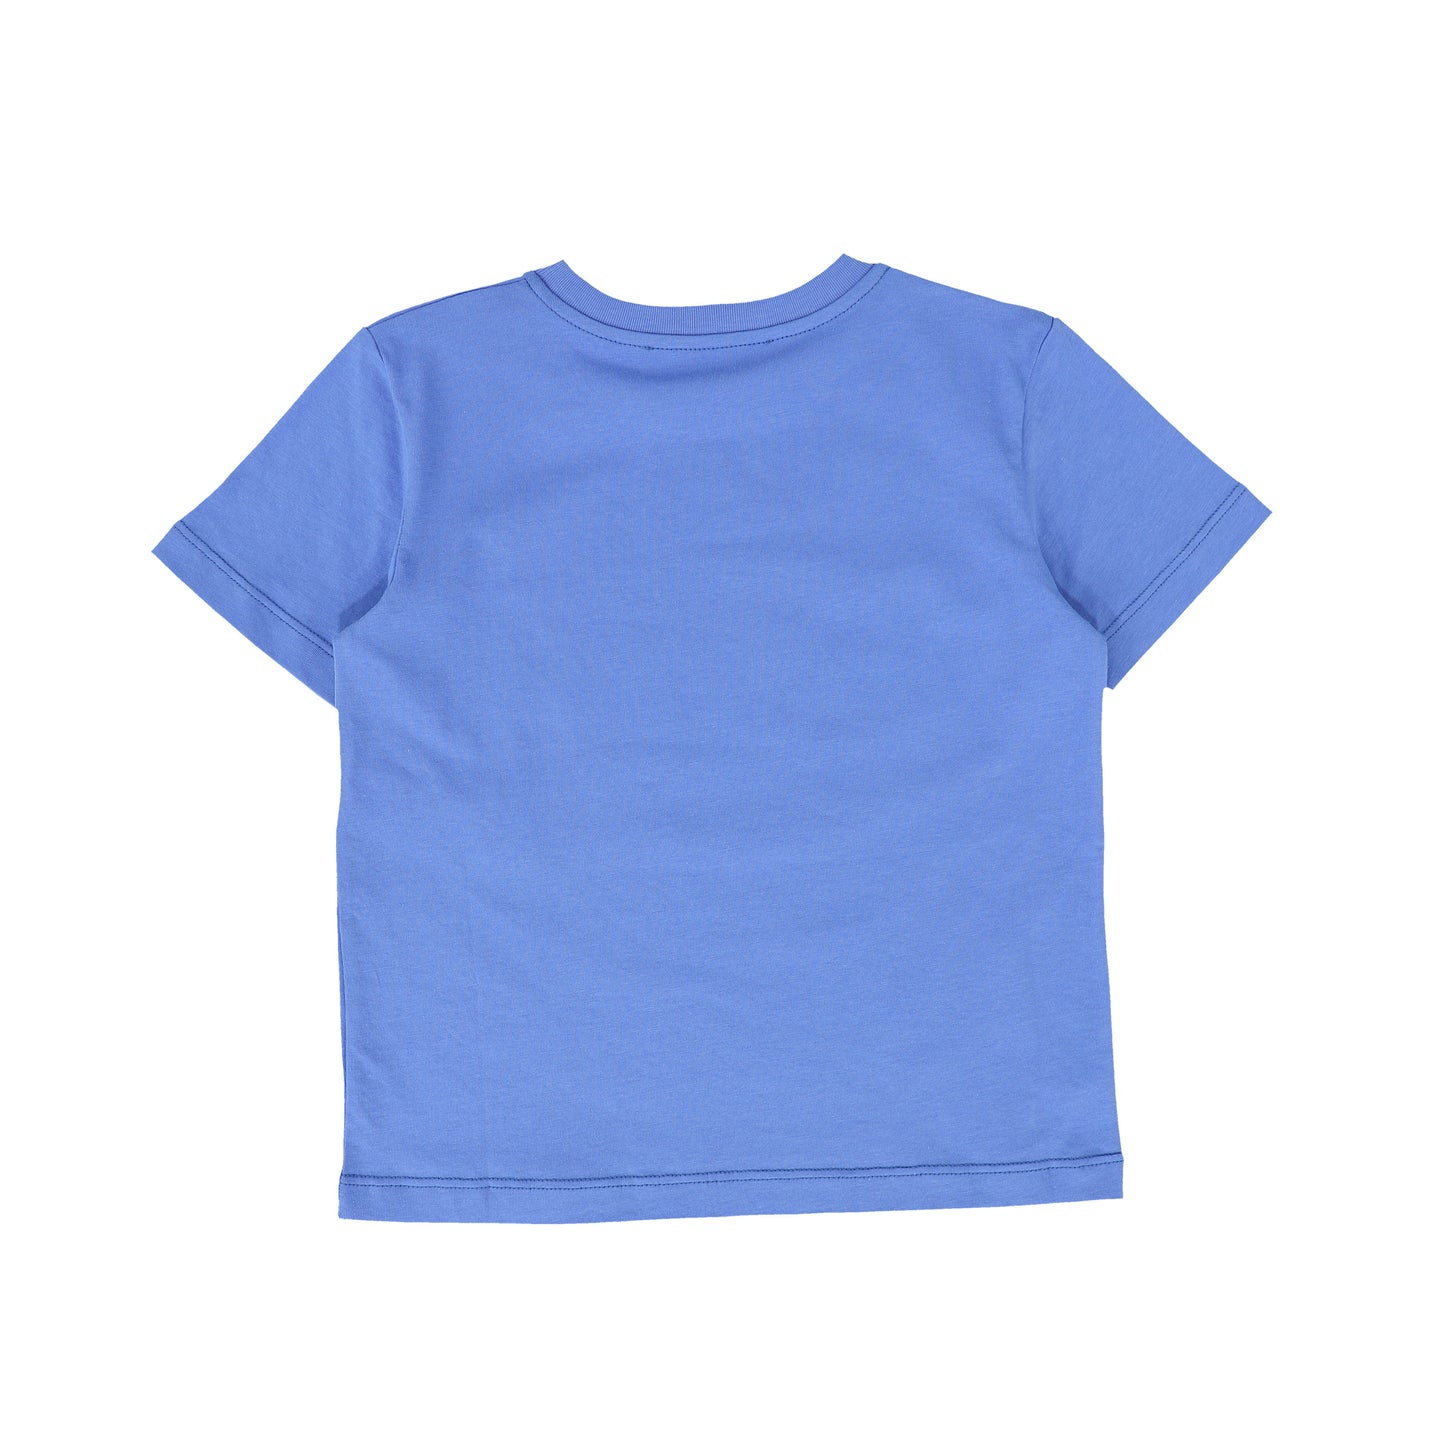 BE FOR ALL ROYAL BLUE WORDED TEE [FINAL SALE]